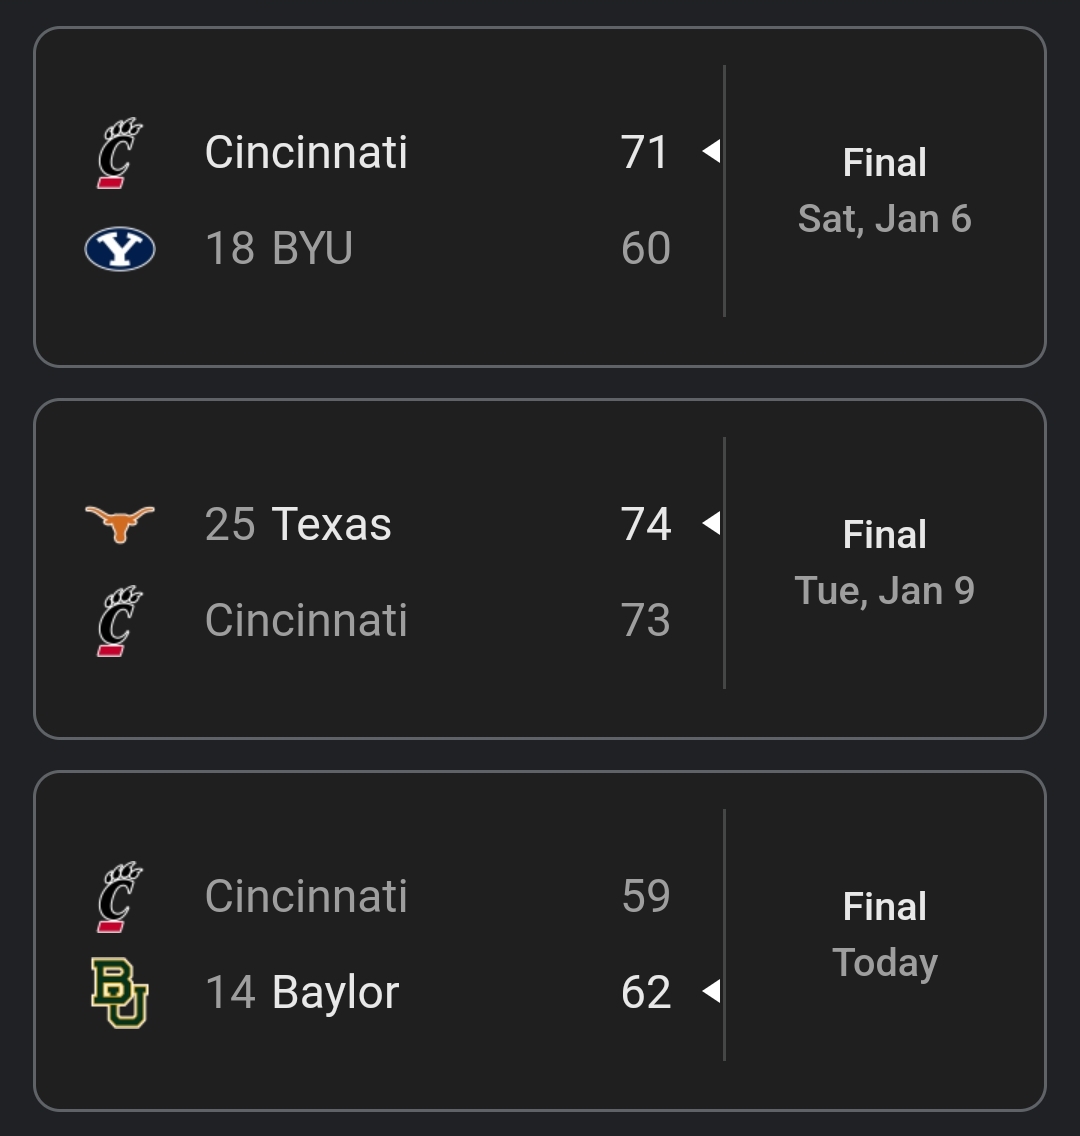 Another brutal loss for Wes Miller's Cincinnati squad. The Bearcats are a couple bounces from opening Big 12 play with three straight wins over ranked opponents. This is why the Big 12 is the toughest and deepest basketball conference in the country, and it's not even close.